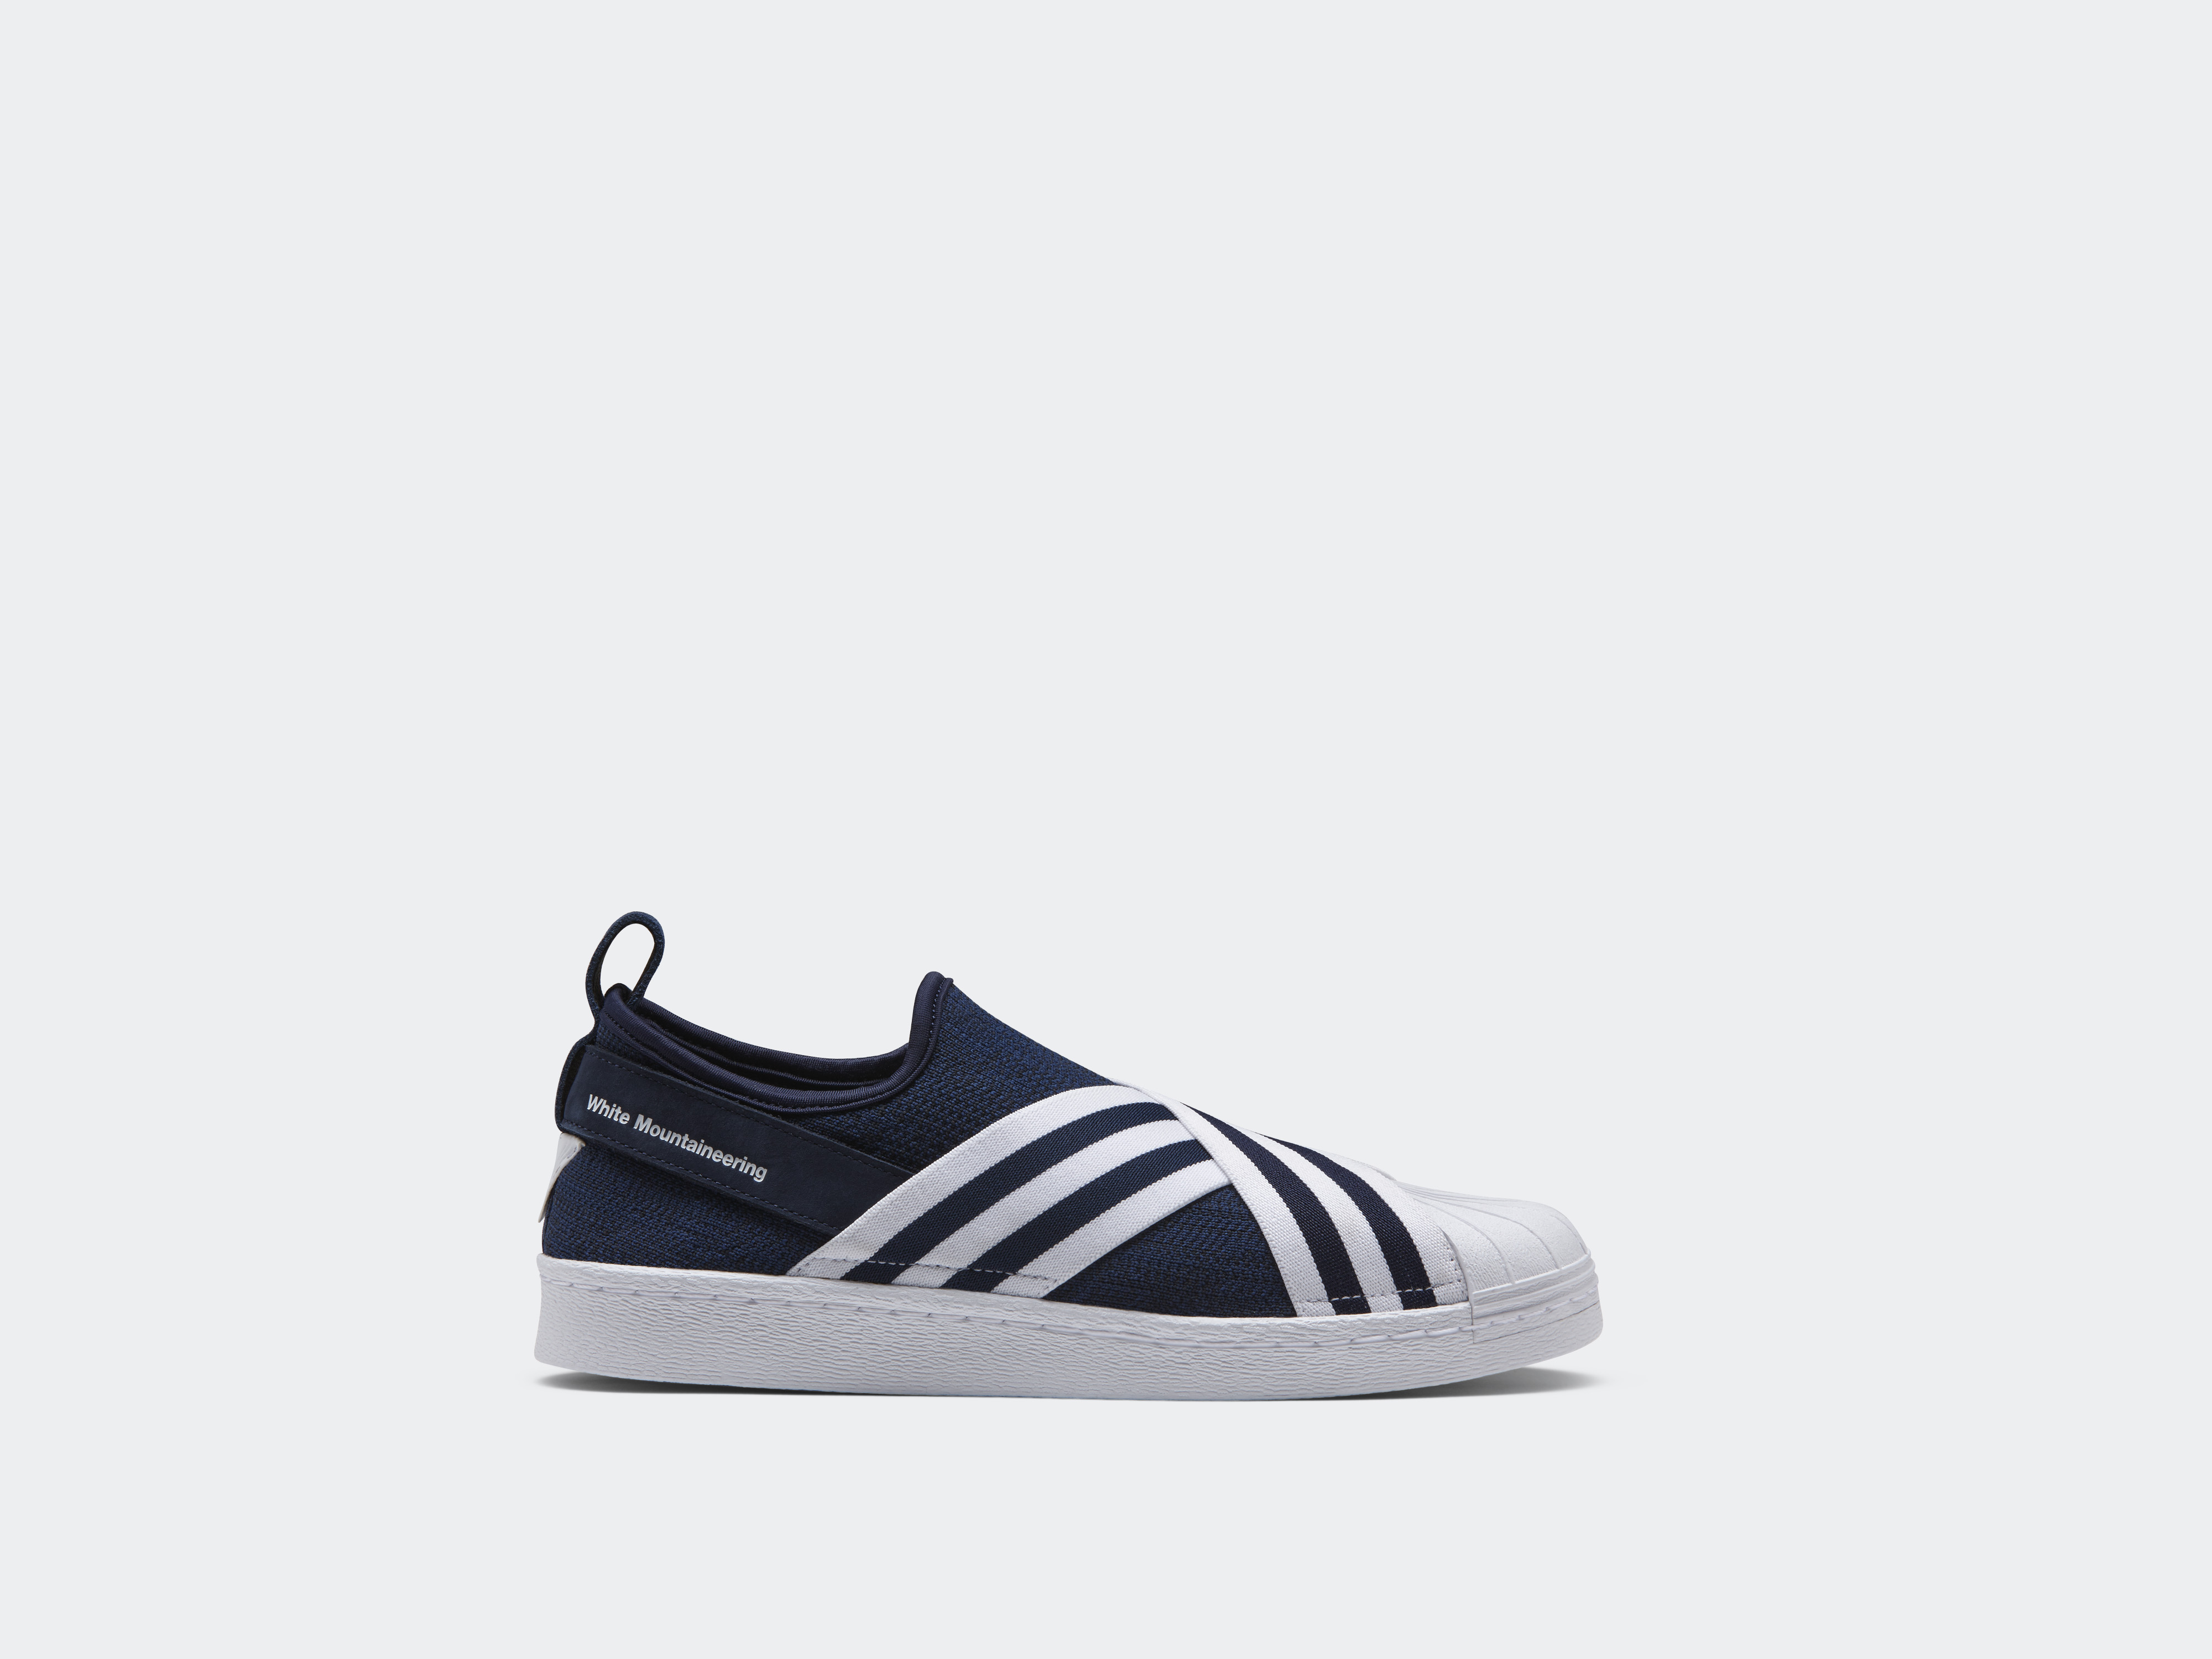 White Mountaineering x adidas Superstar Slip-On "Injection" Pack